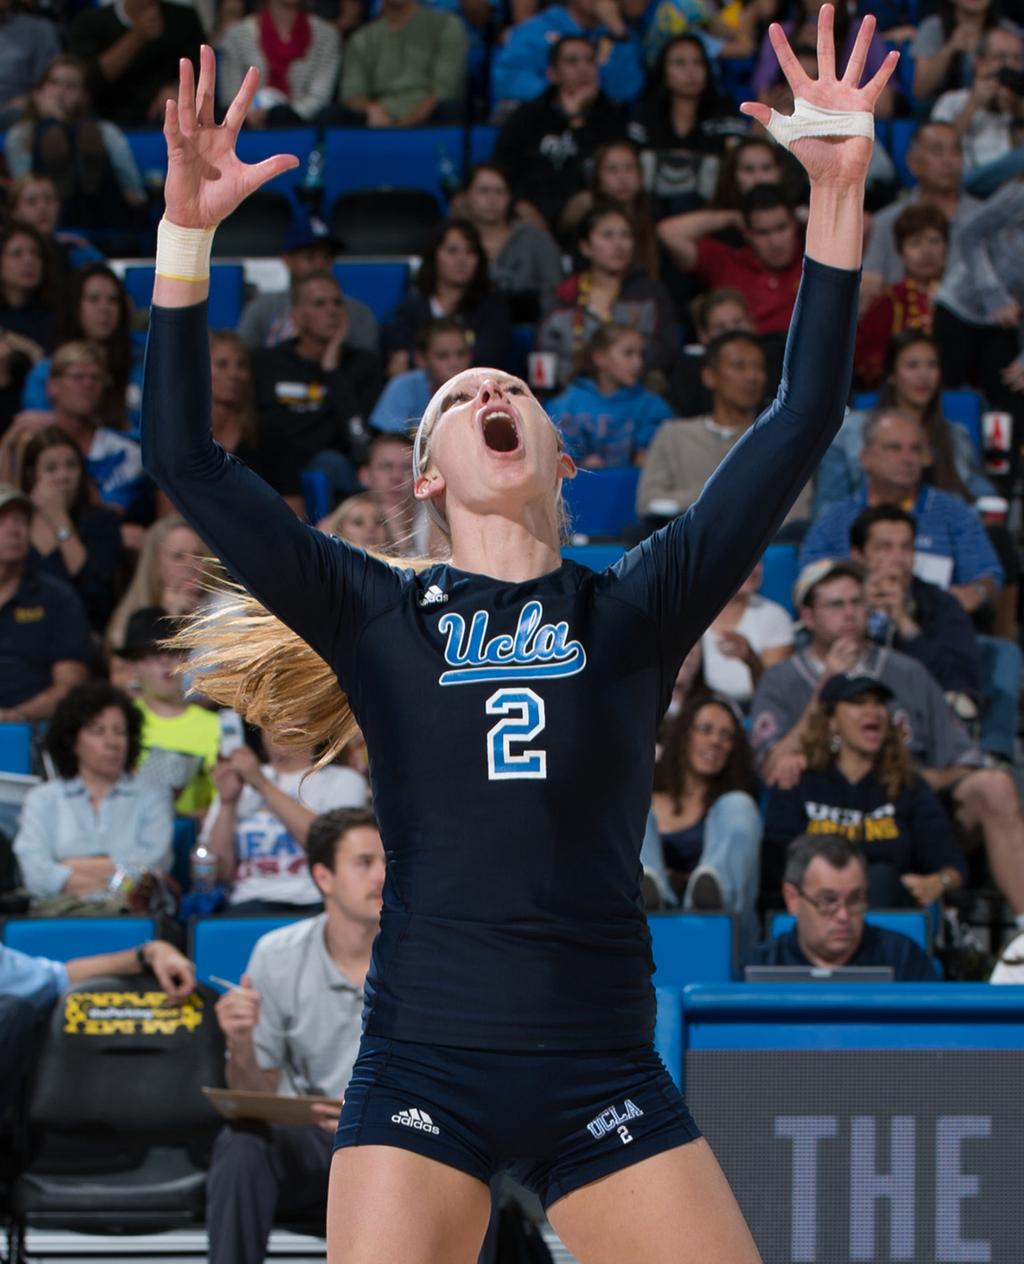 2010 Was named to the Pacifi c-10 Conference All-Freshman Honorable Mention Team after placing third on the squad with 2.08 digs per set and fourth with 0.17 service aces per set... added 1.